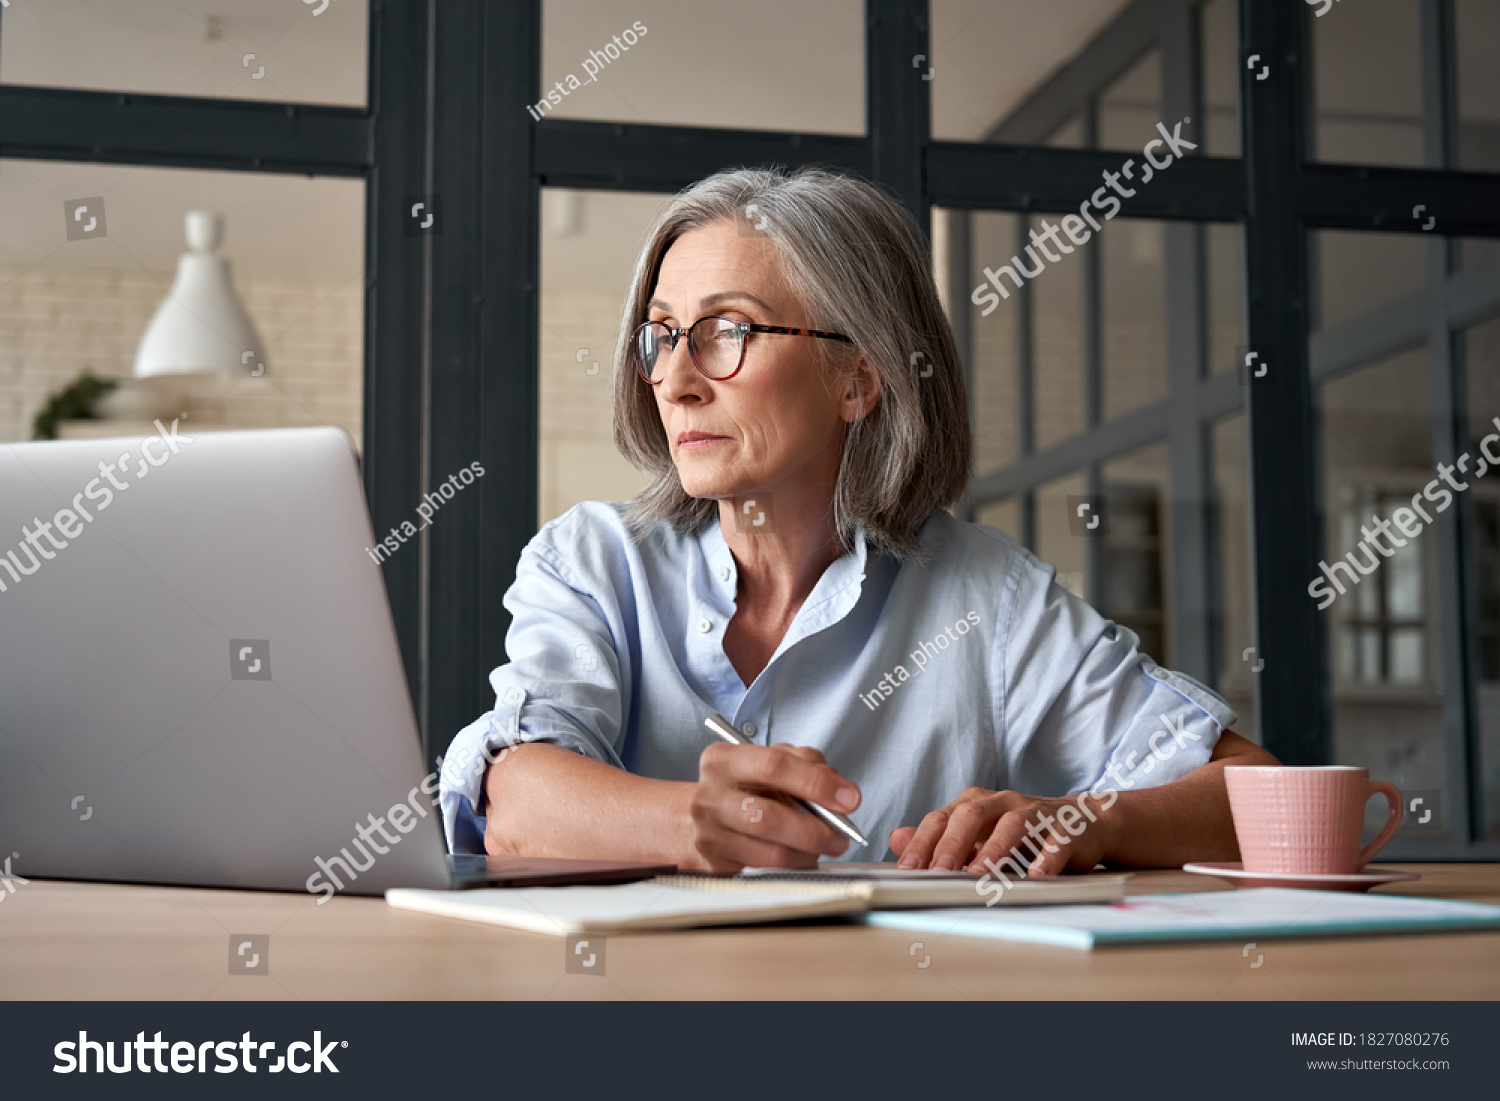 21,567 Woman 50 Office Images, Stock photo